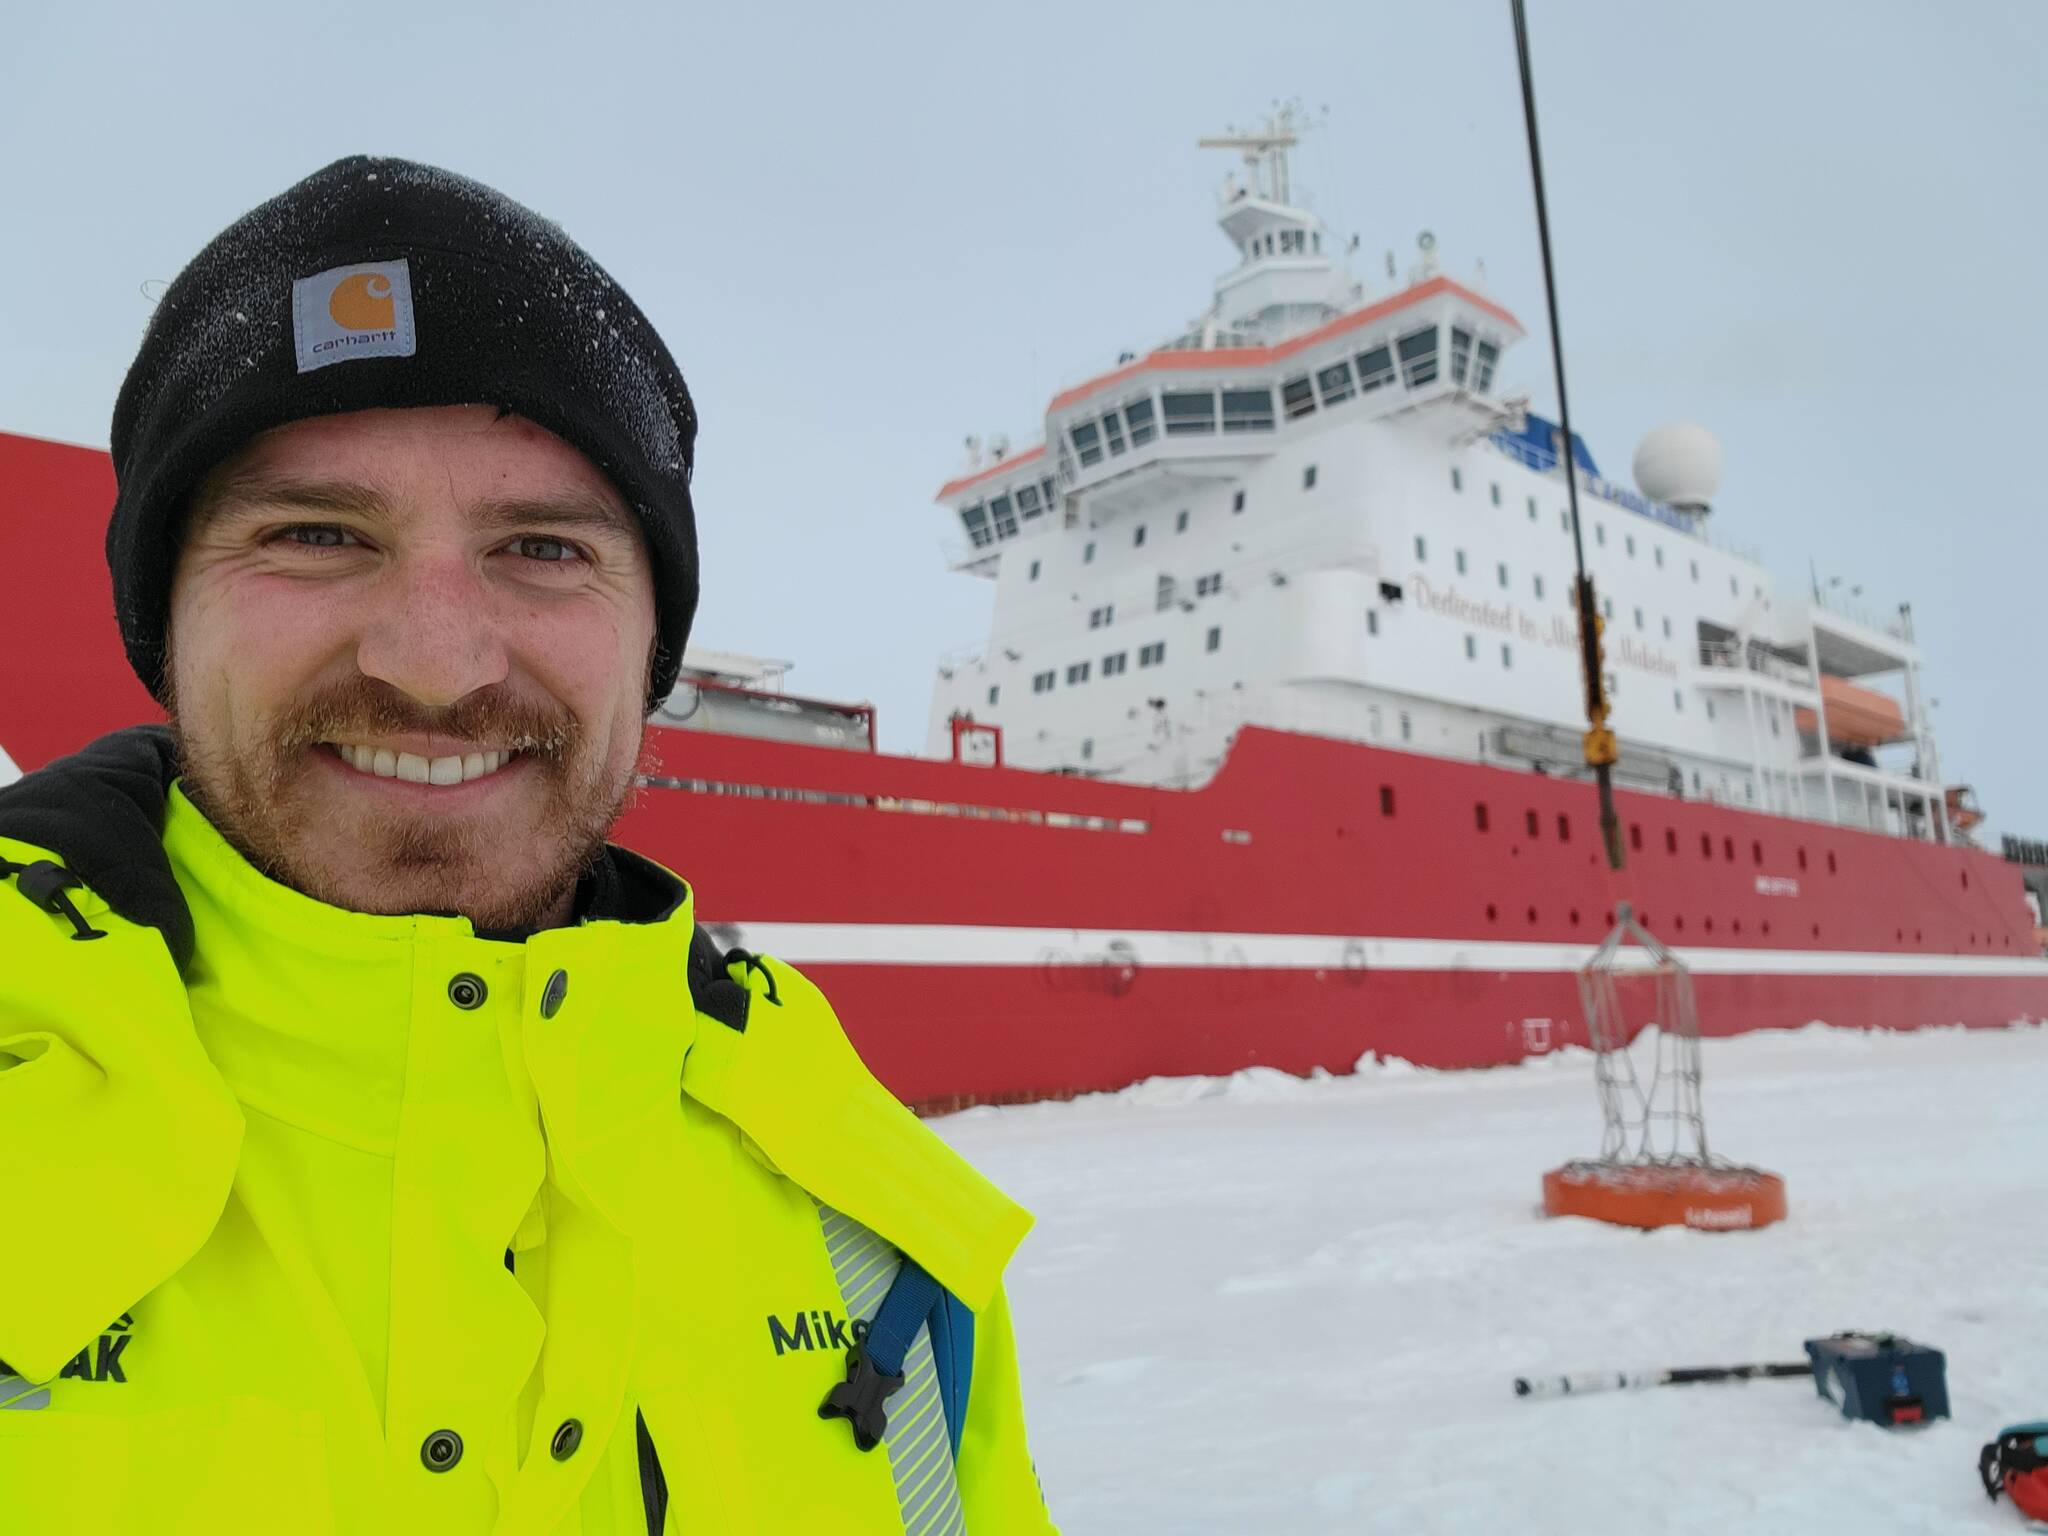 Michael Patz, raised in Juneau and part of the expedition to find the wreck of Ernest Shackleton’s vessel, the Endurance, stands in front of the S.A. Agulhas II, the expedition’s icebreaker. (Courtesy photo / Michael Patz)